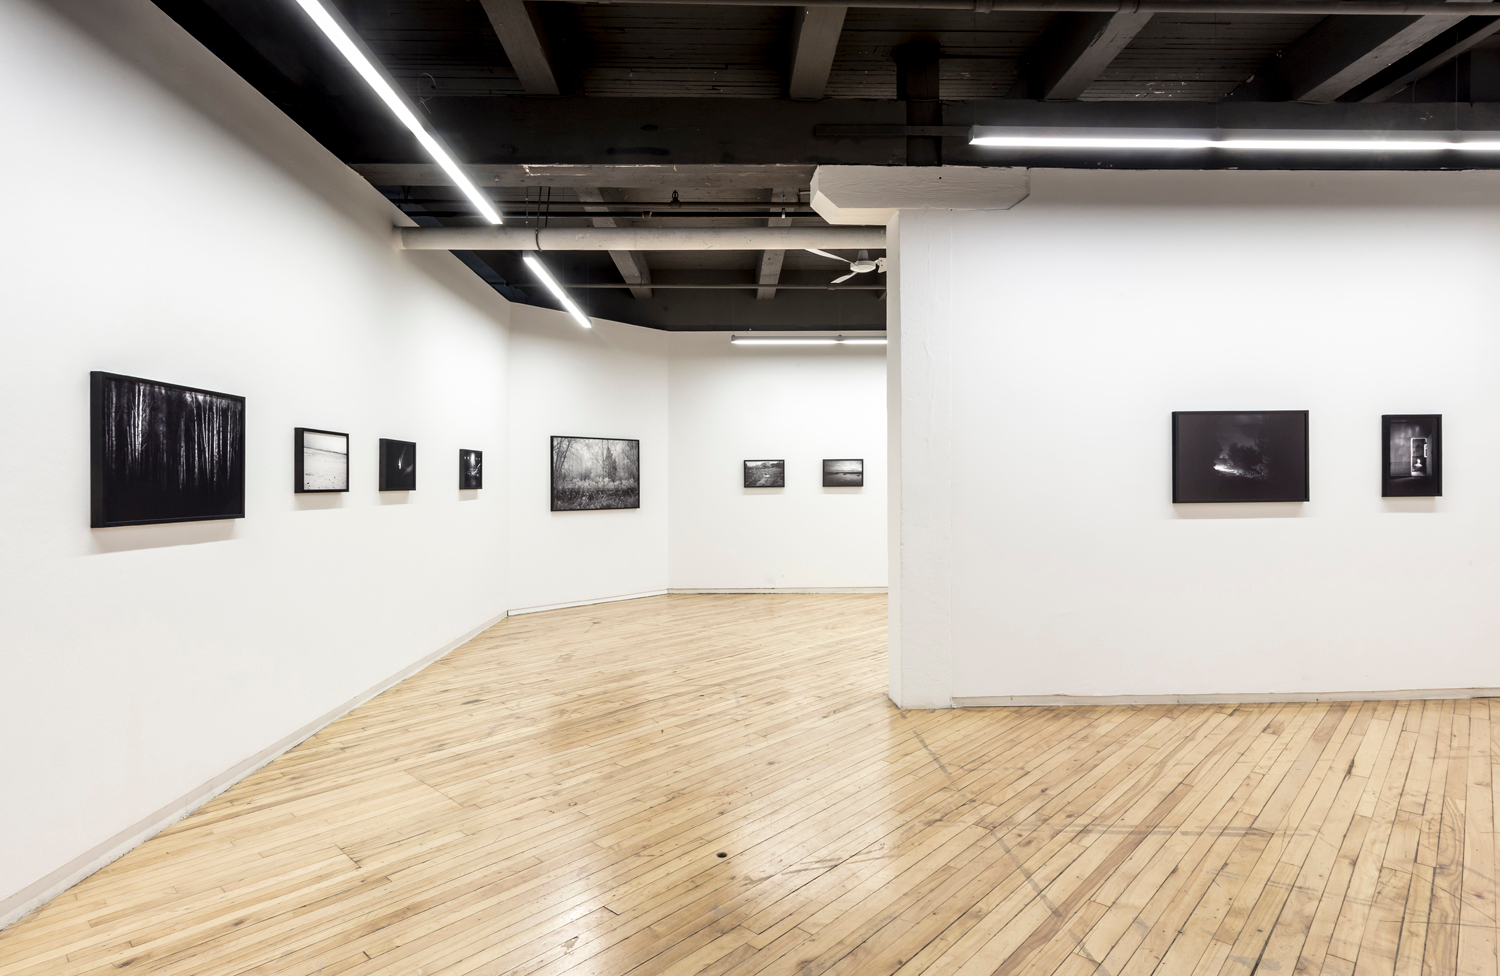     Installation view of Ian Willms, The Road to Nowhere, Photo: Toni Hafkenscheid

